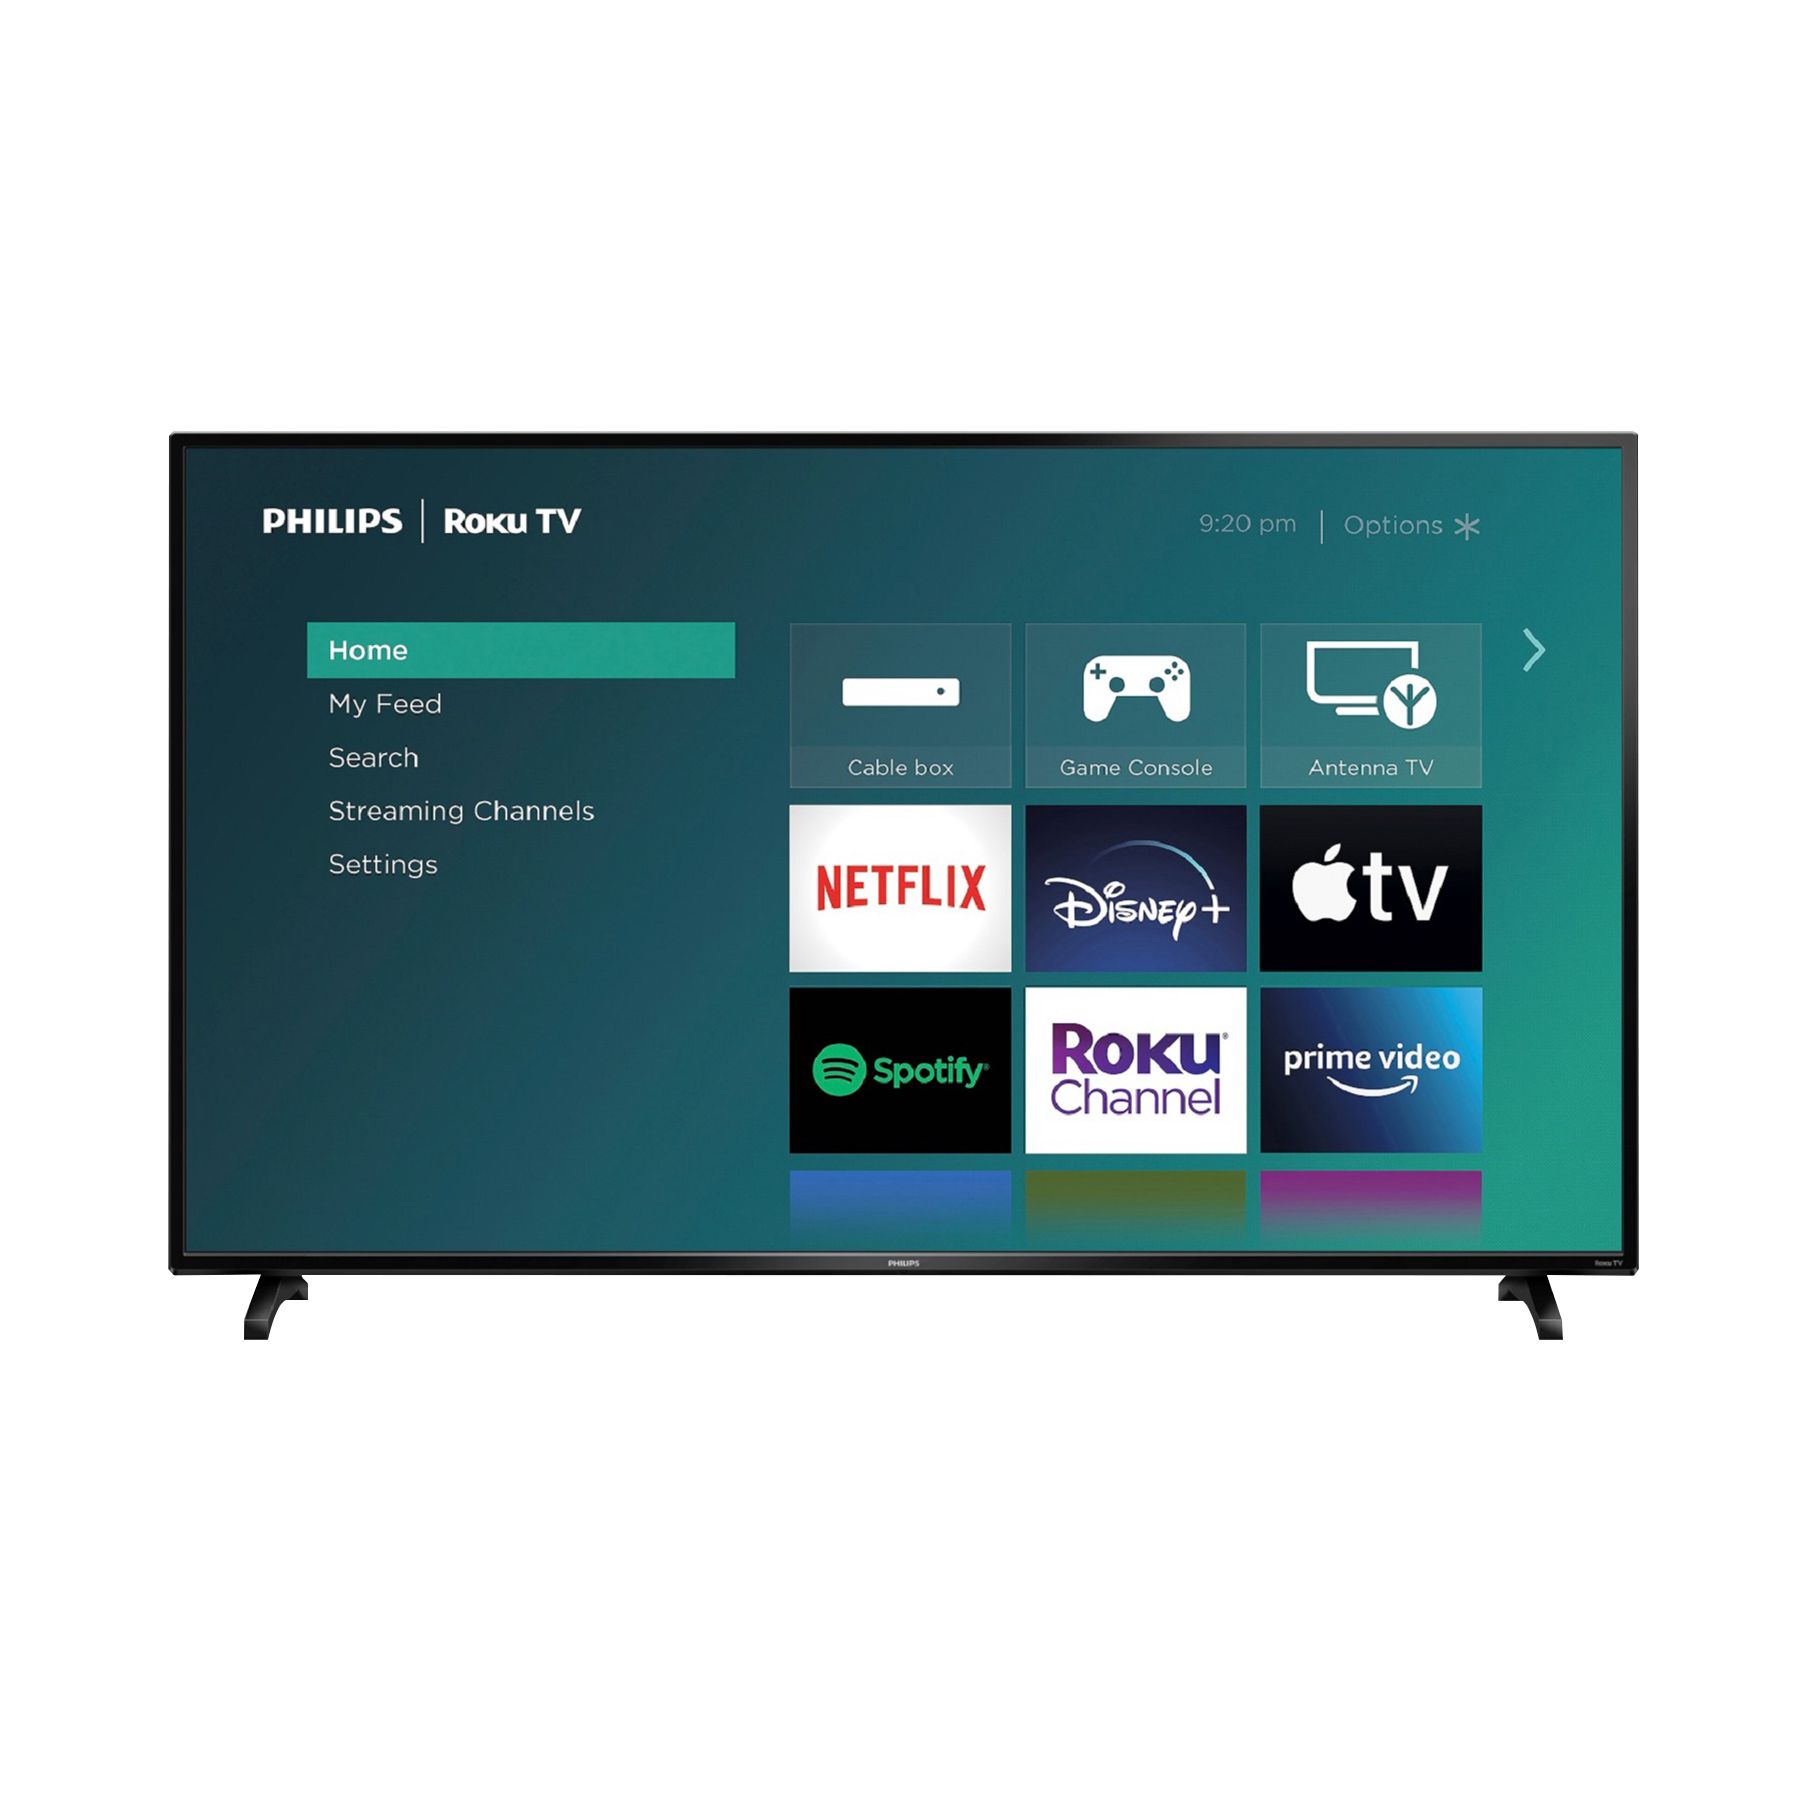 TCL 65 4 Series LED 4K UHD Roku Smart TV with 4-Year Coverage